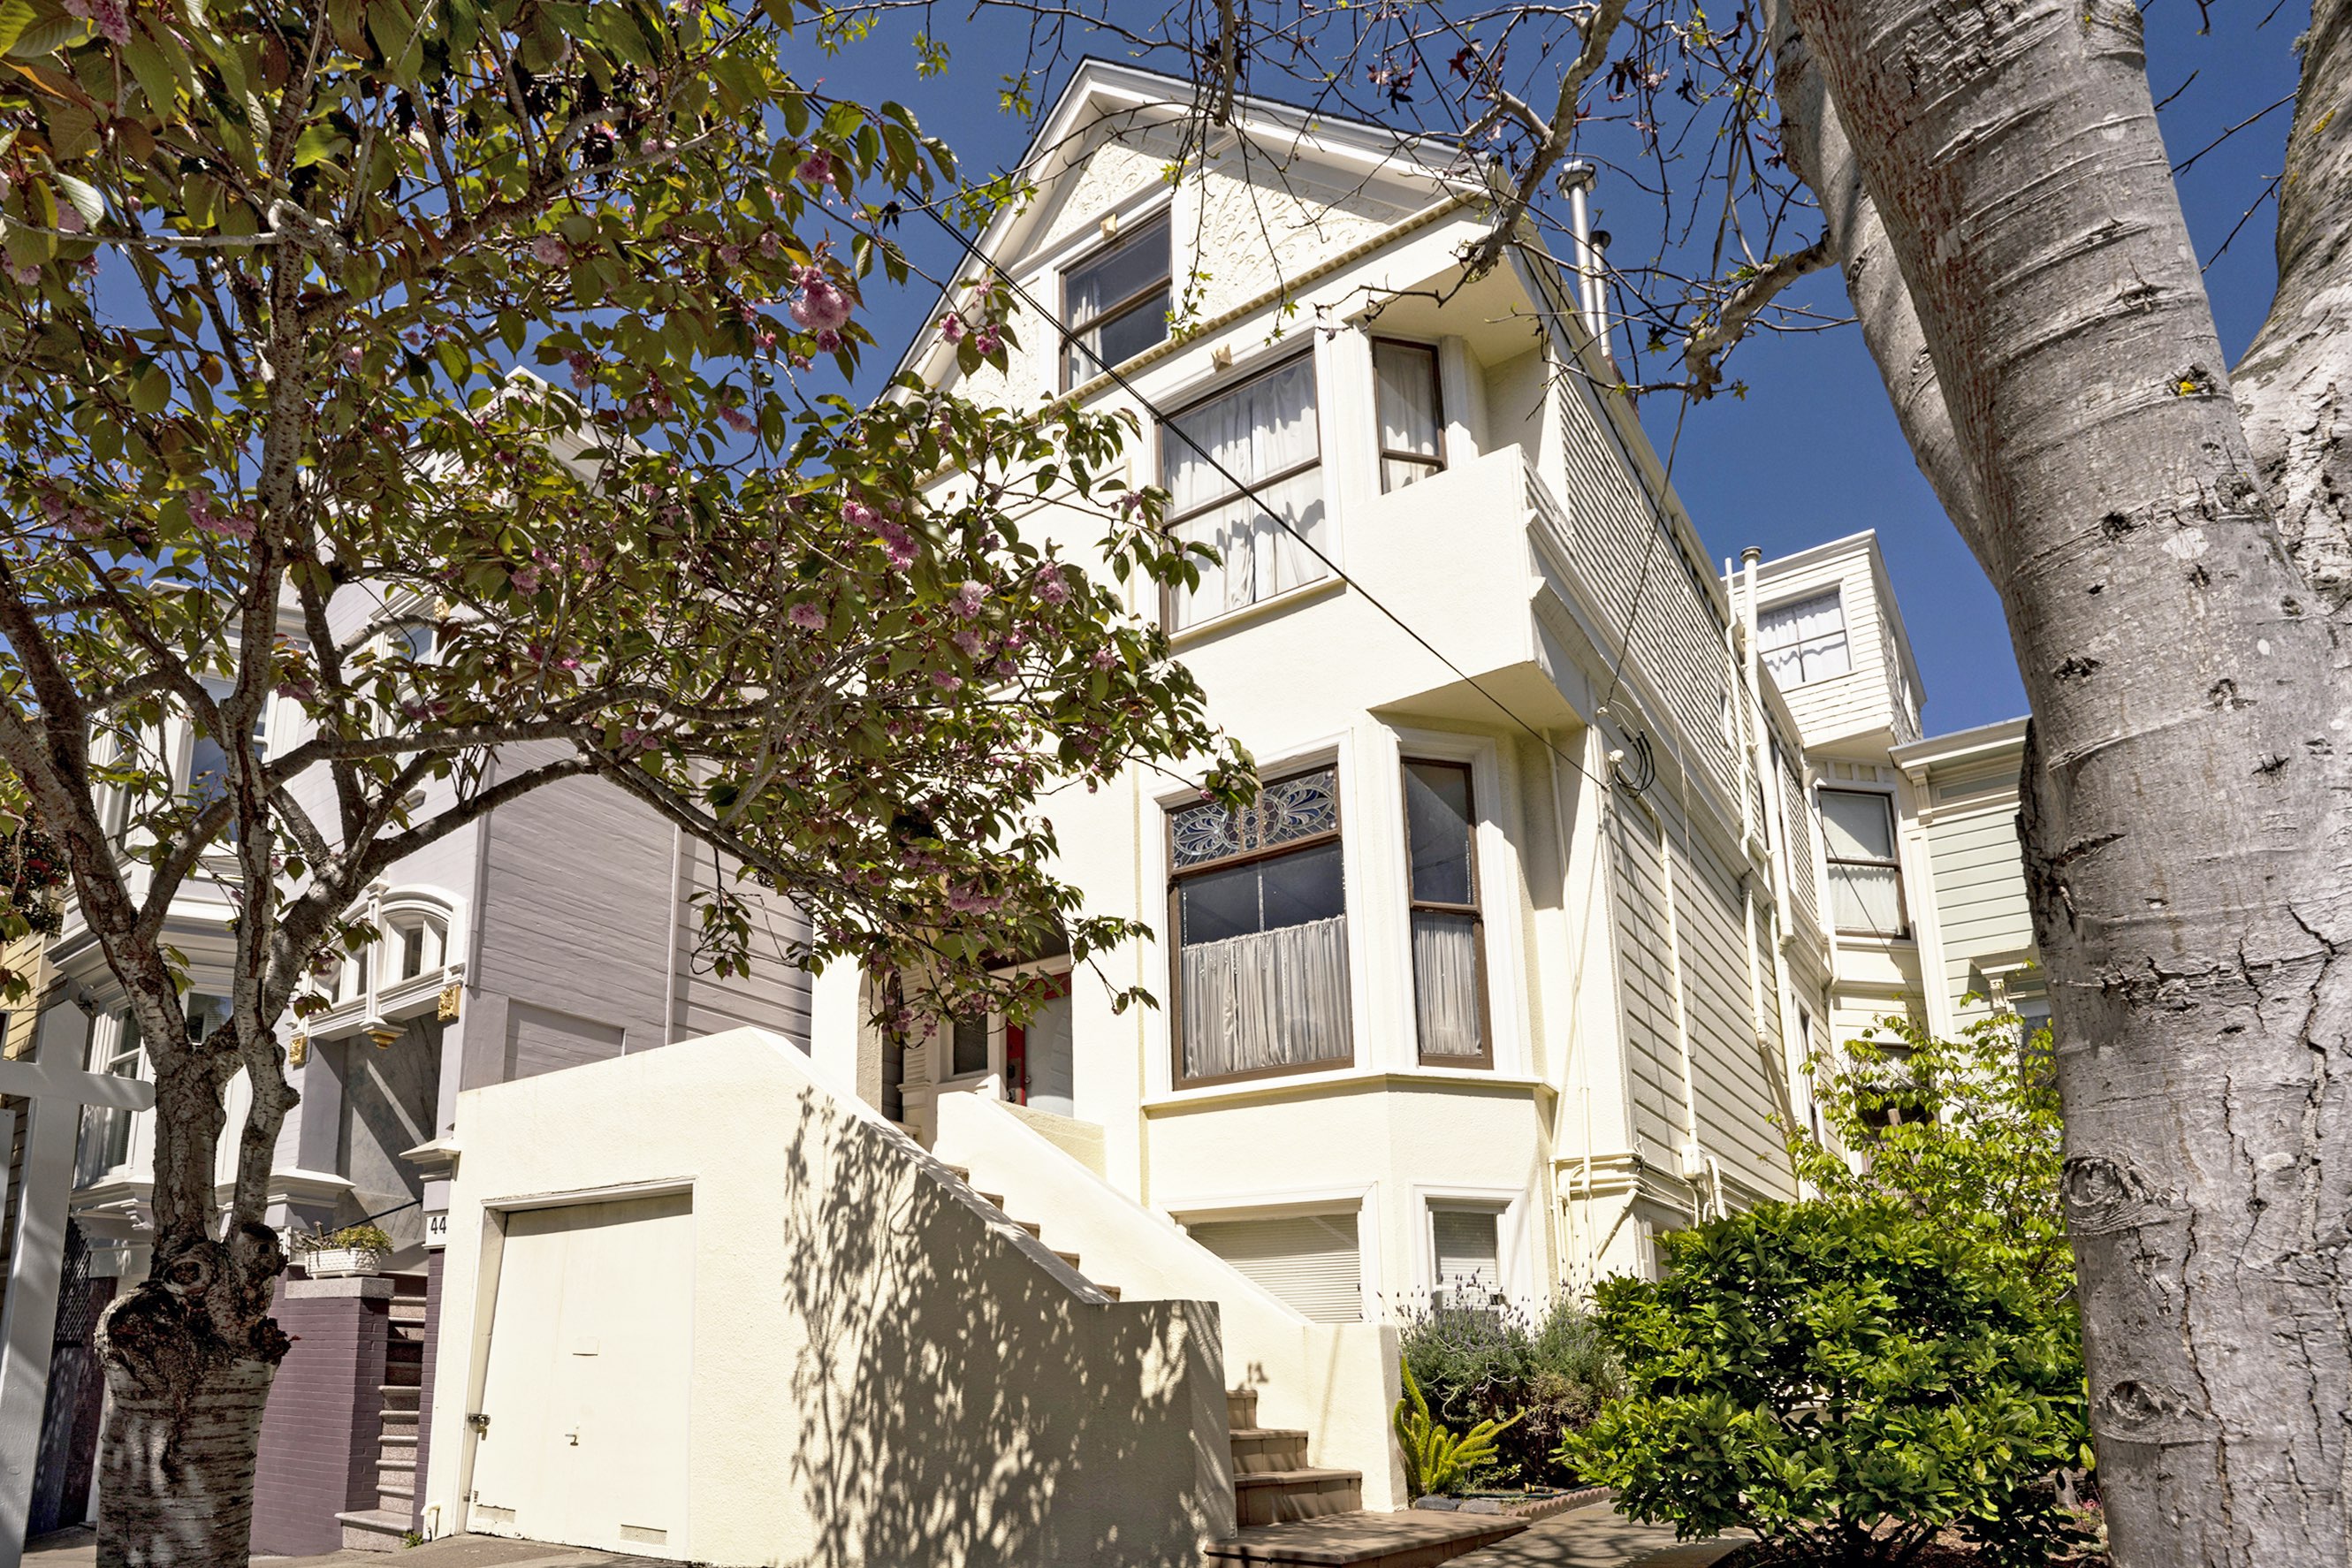 View of the front facade at 38 Lyon, a large two story single-family home purchased via agent John DiDomenico